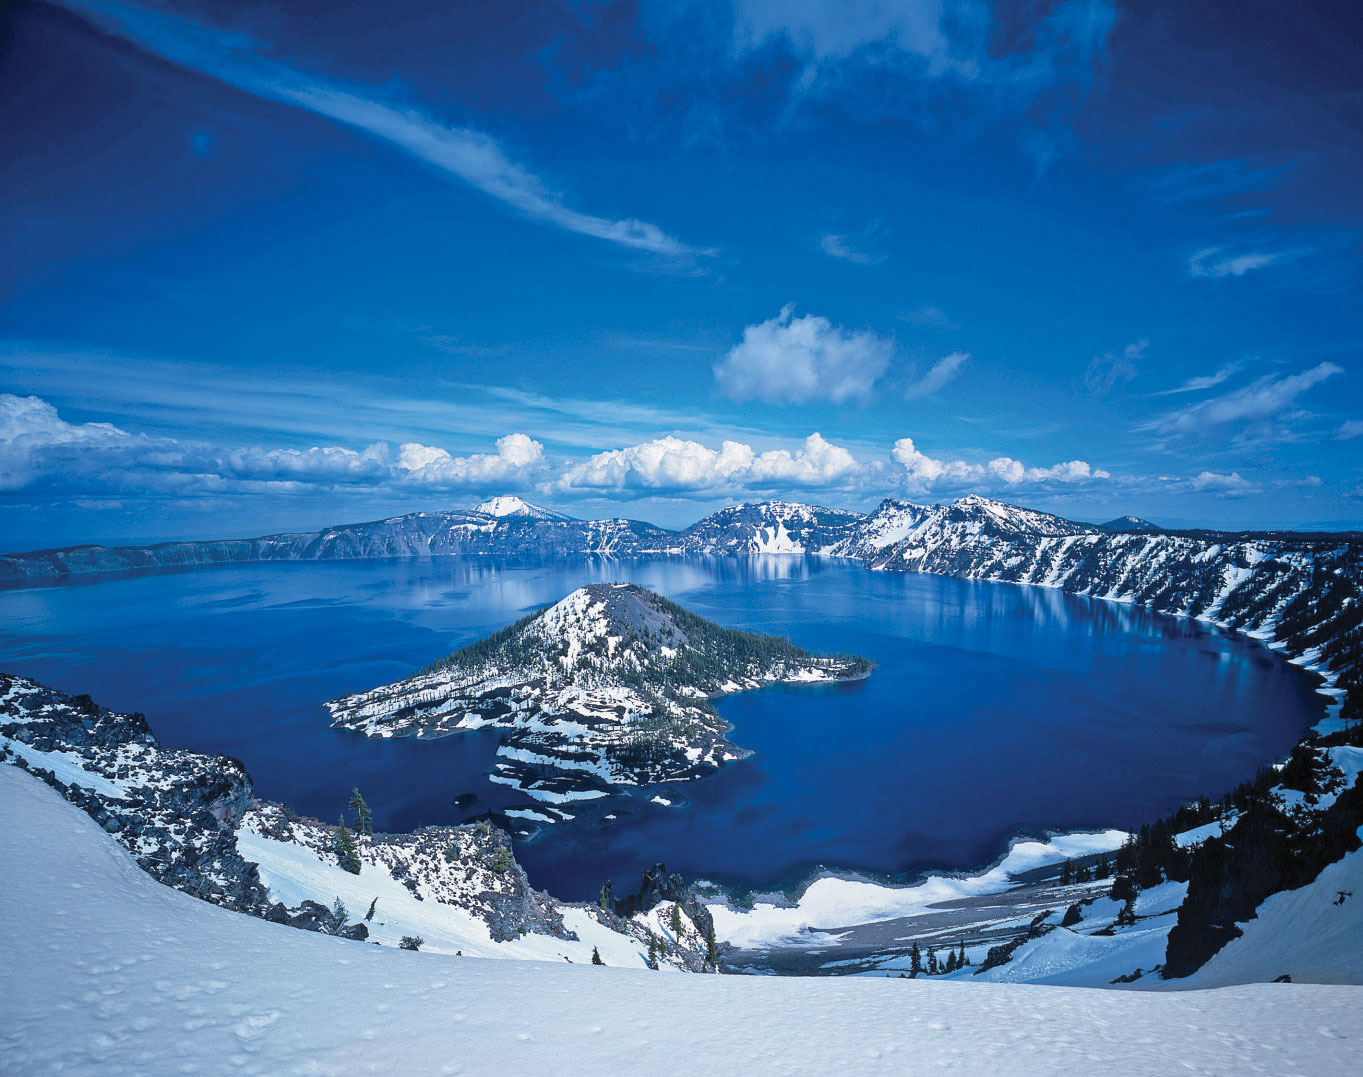 Crater Lake National Park. Photography: © David Muench/CORBIS